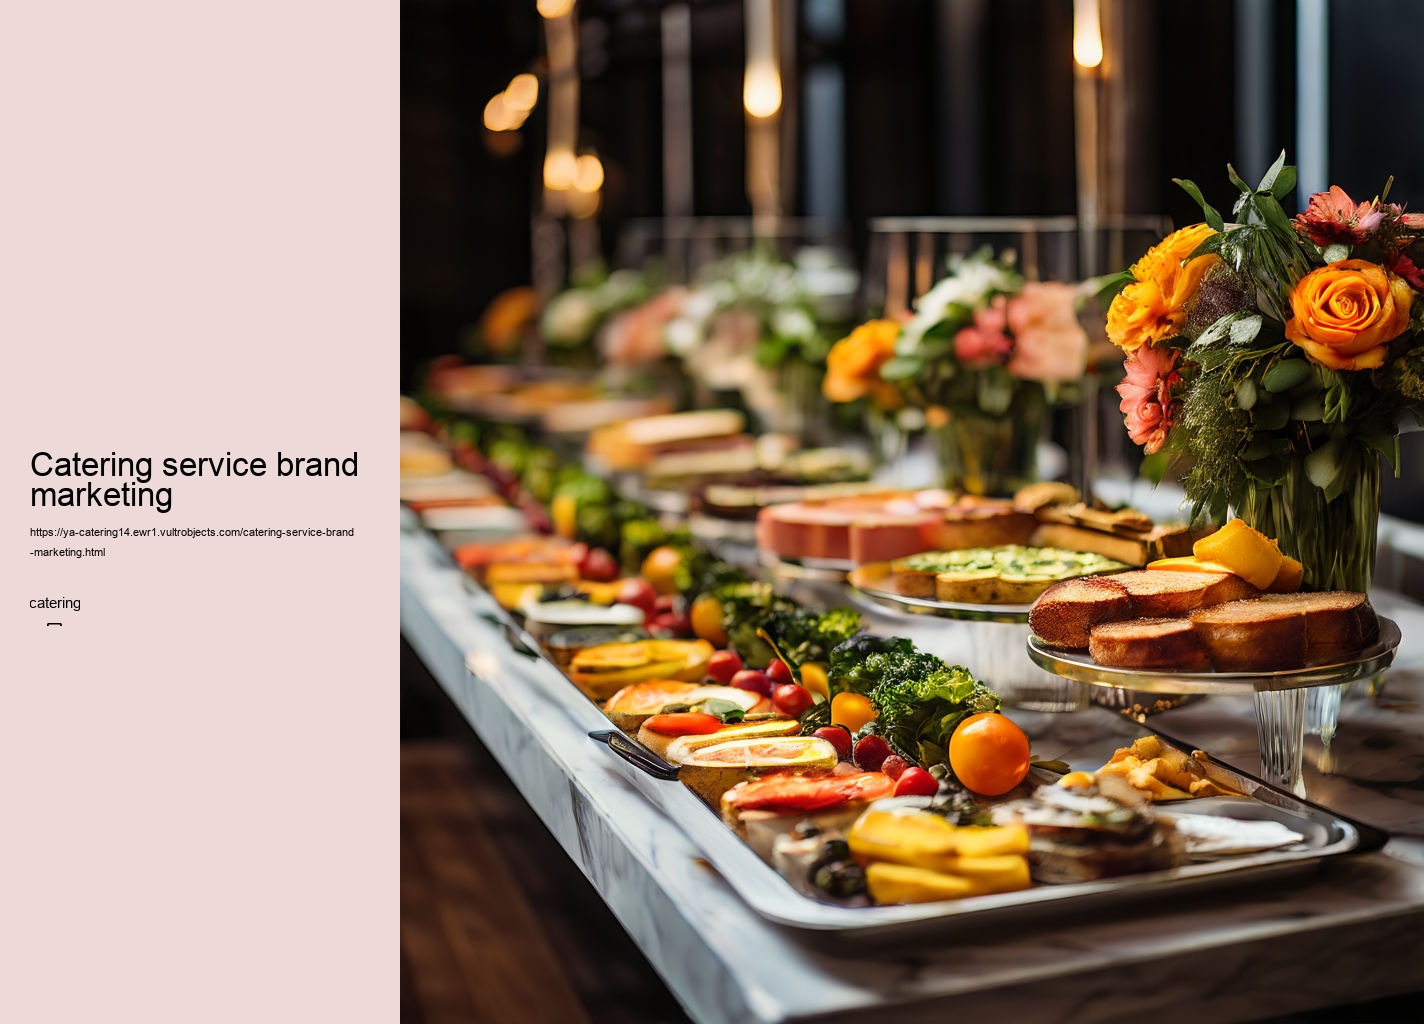 Catering service brand marketing